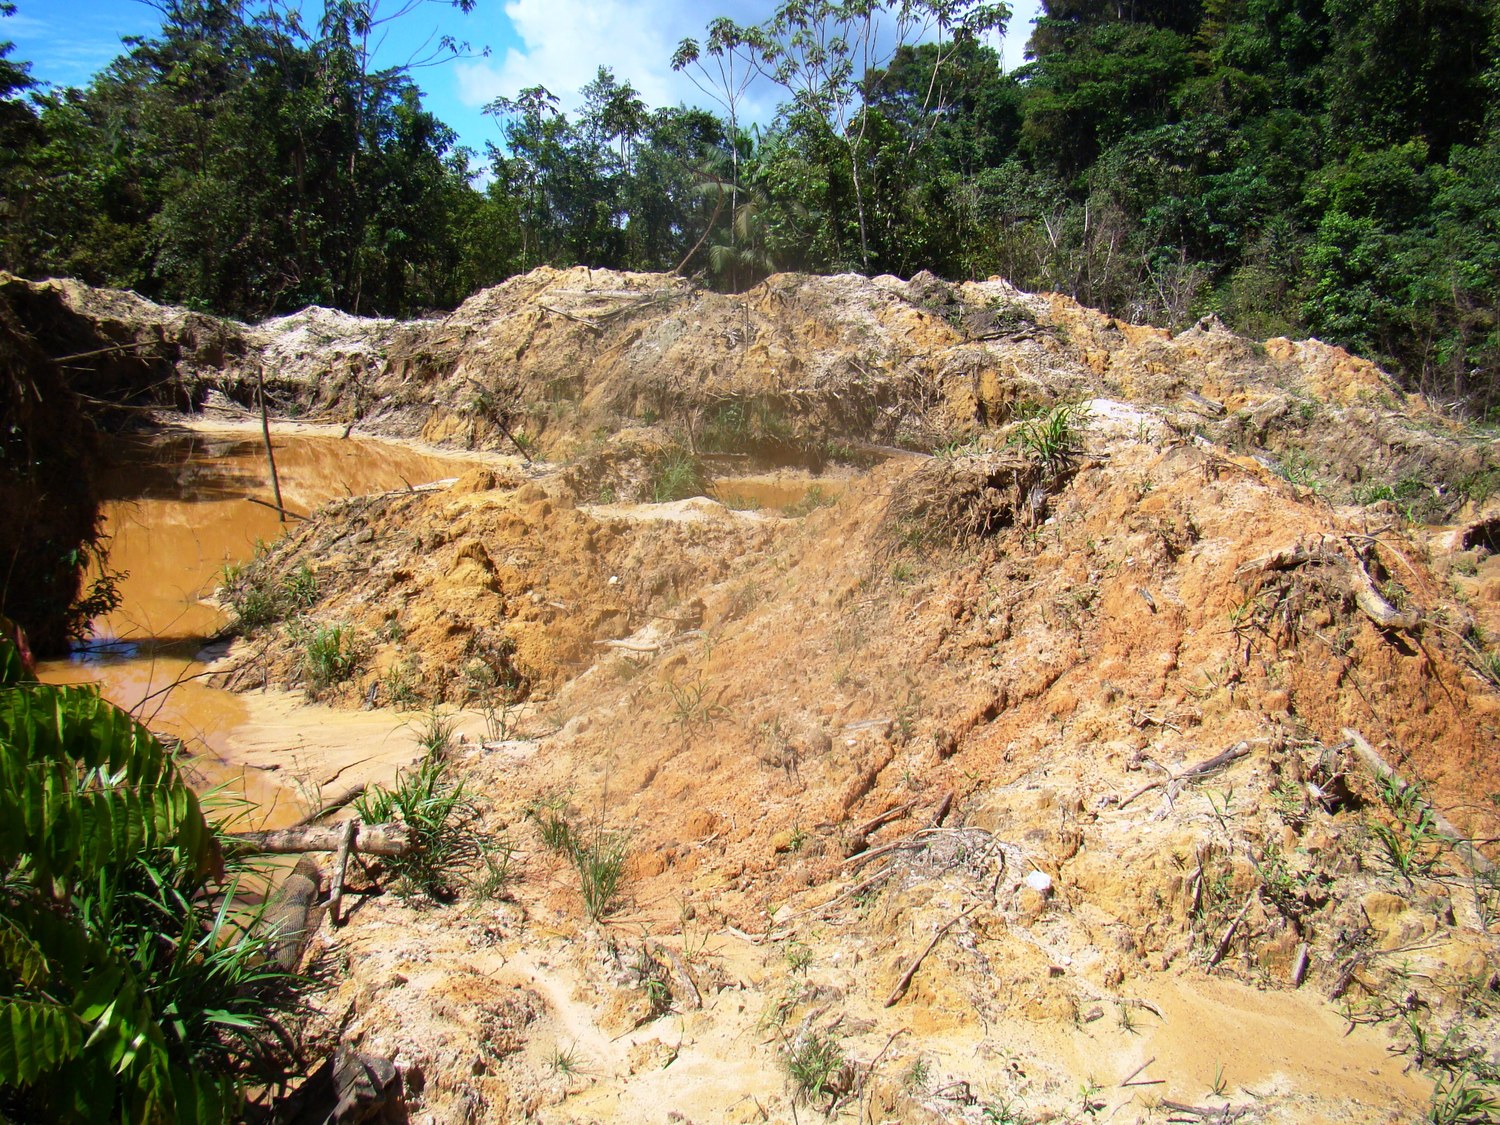 The scars of illegal gold mining in Suriname, South America (photo by William Laurance)